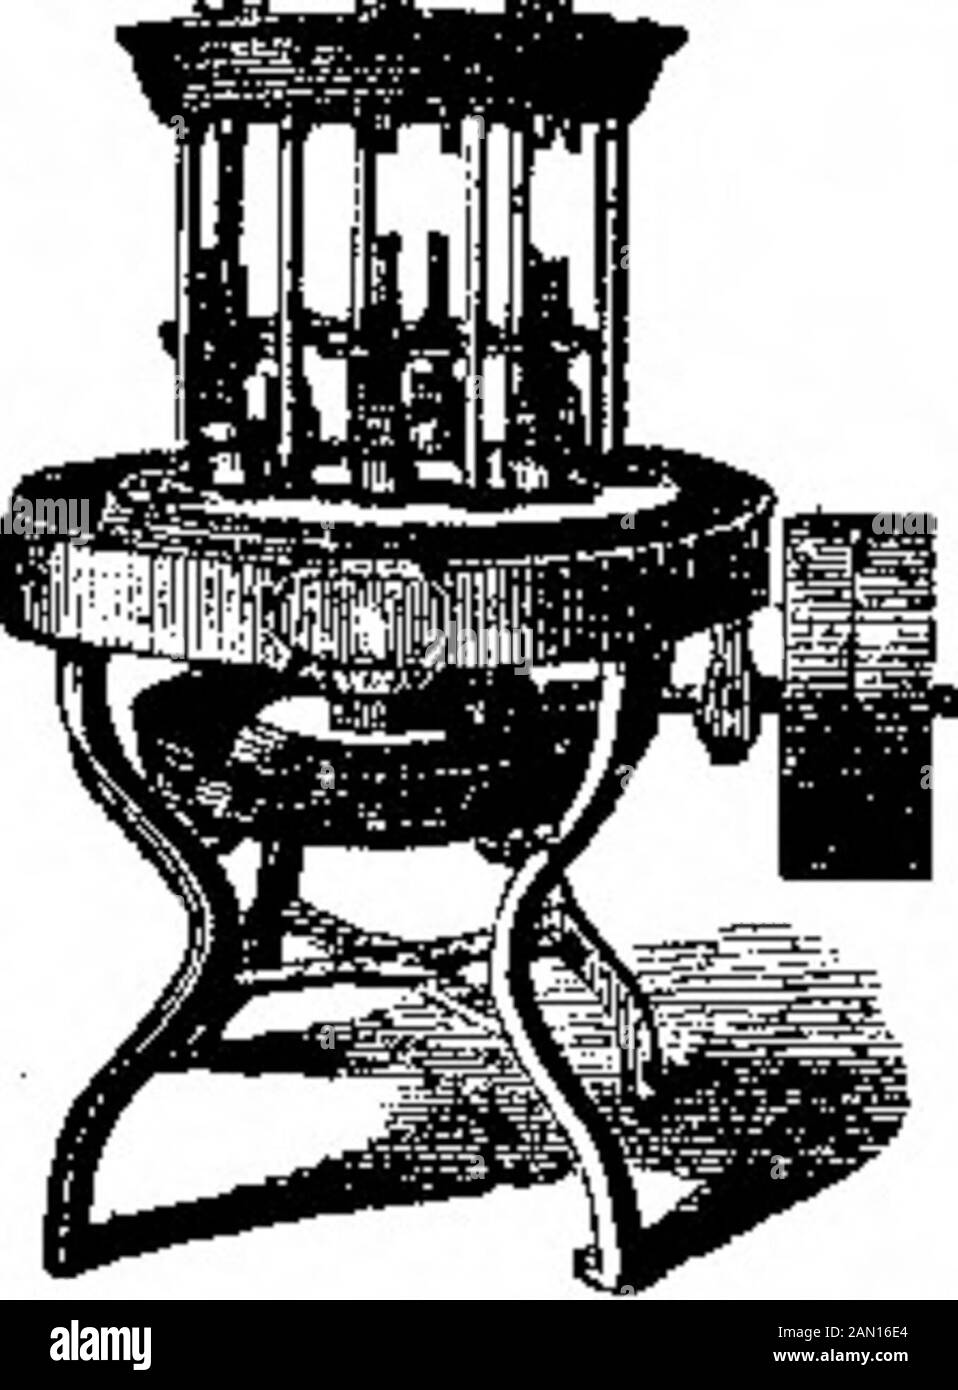 Scientific American Volume 47 Number 18 (October 1882) . NUT TAPPING MACHINE. DURRELLS PATENT. No. 1 Machine, 900 lb., 7 spindles,a 1,050 72 600 3 Capacity of 7 Spindles, 8,000 per10 hours.Acknowledged to be an indispens-able tool Manufactured byHOWARD BROS., Fxedonia, N, Y. Stock Photo